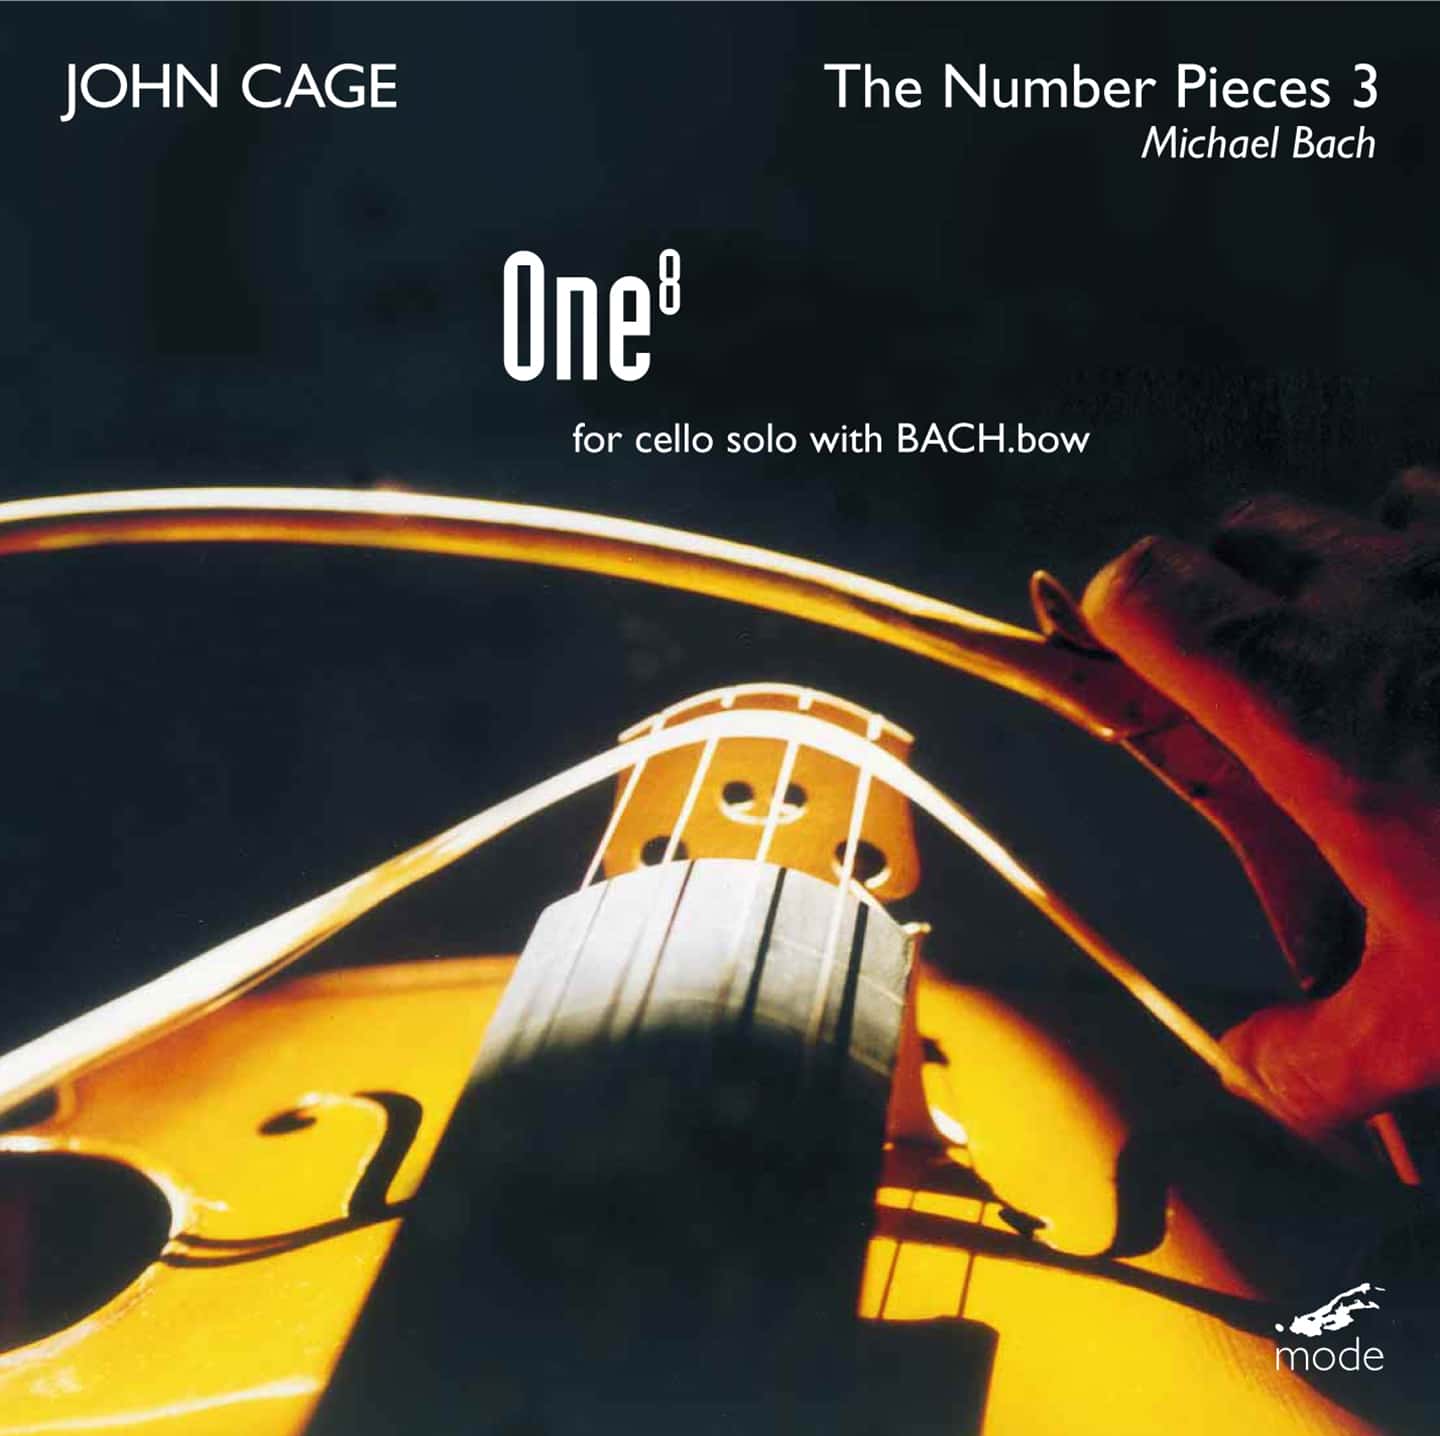 Cage Edition 32 – The Number Pieces 3